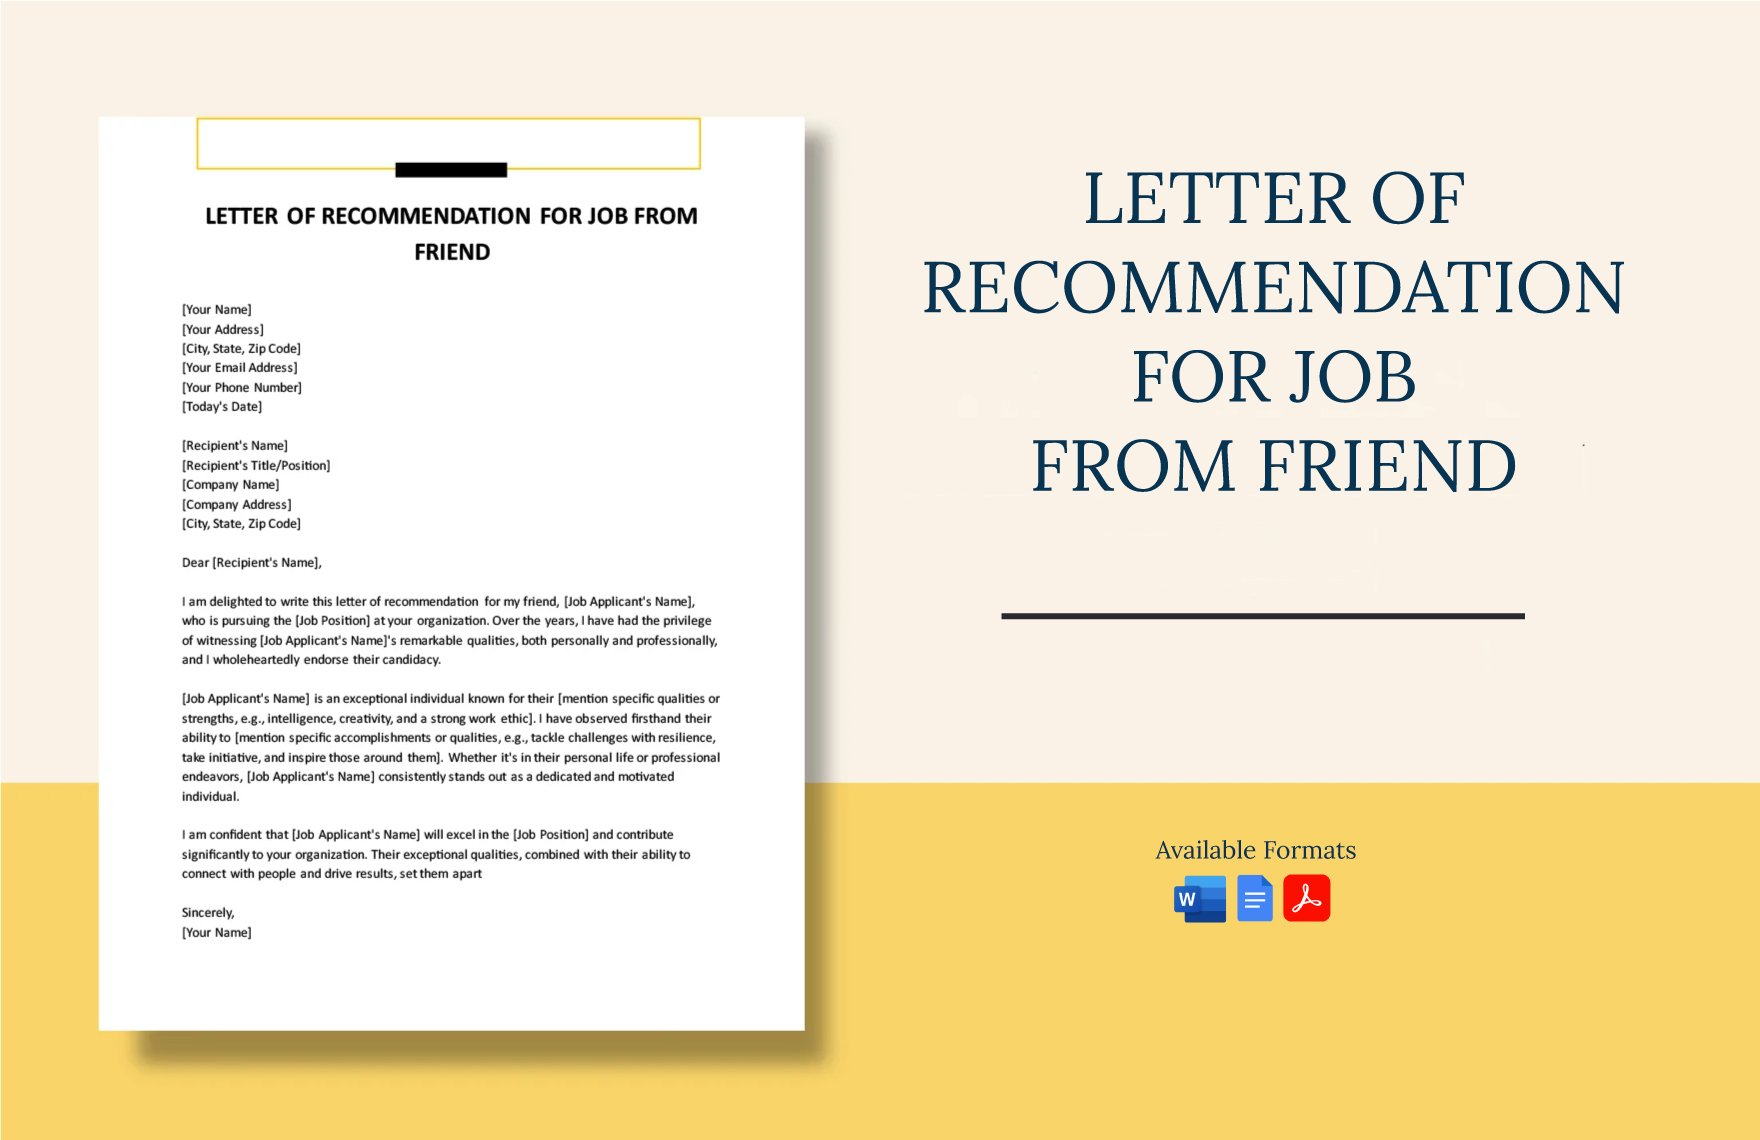 Letter Of Recommendation For Job From Friend in Word, Google Docs, PDF